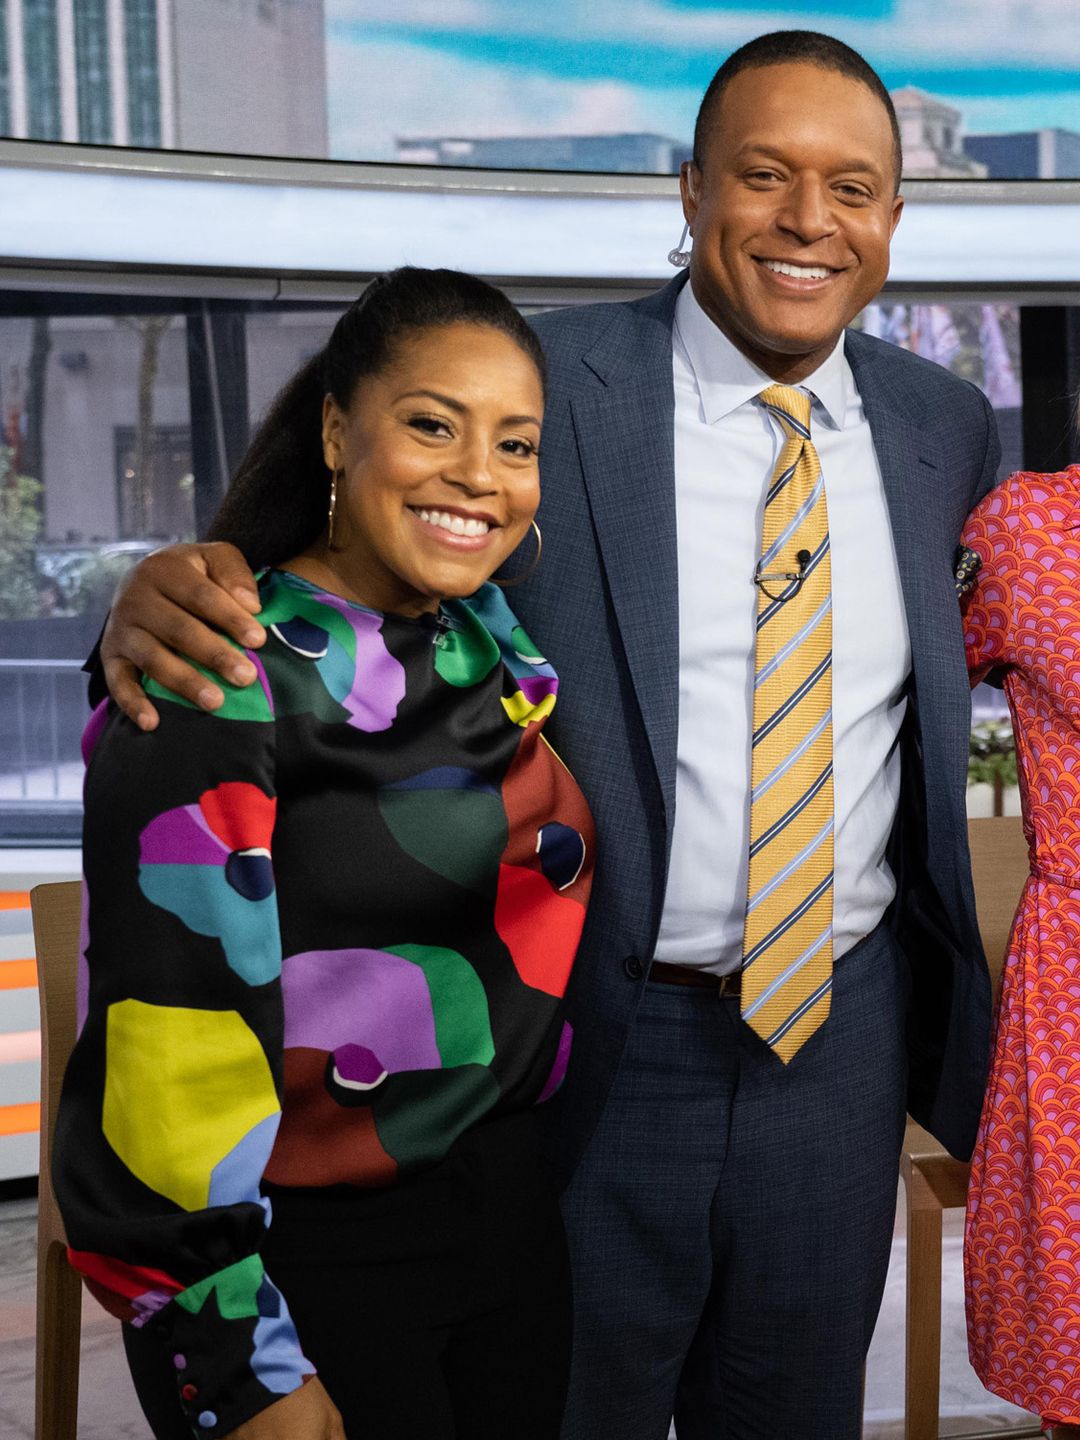 Craig and Sheinelle smiling in the Today Show studio